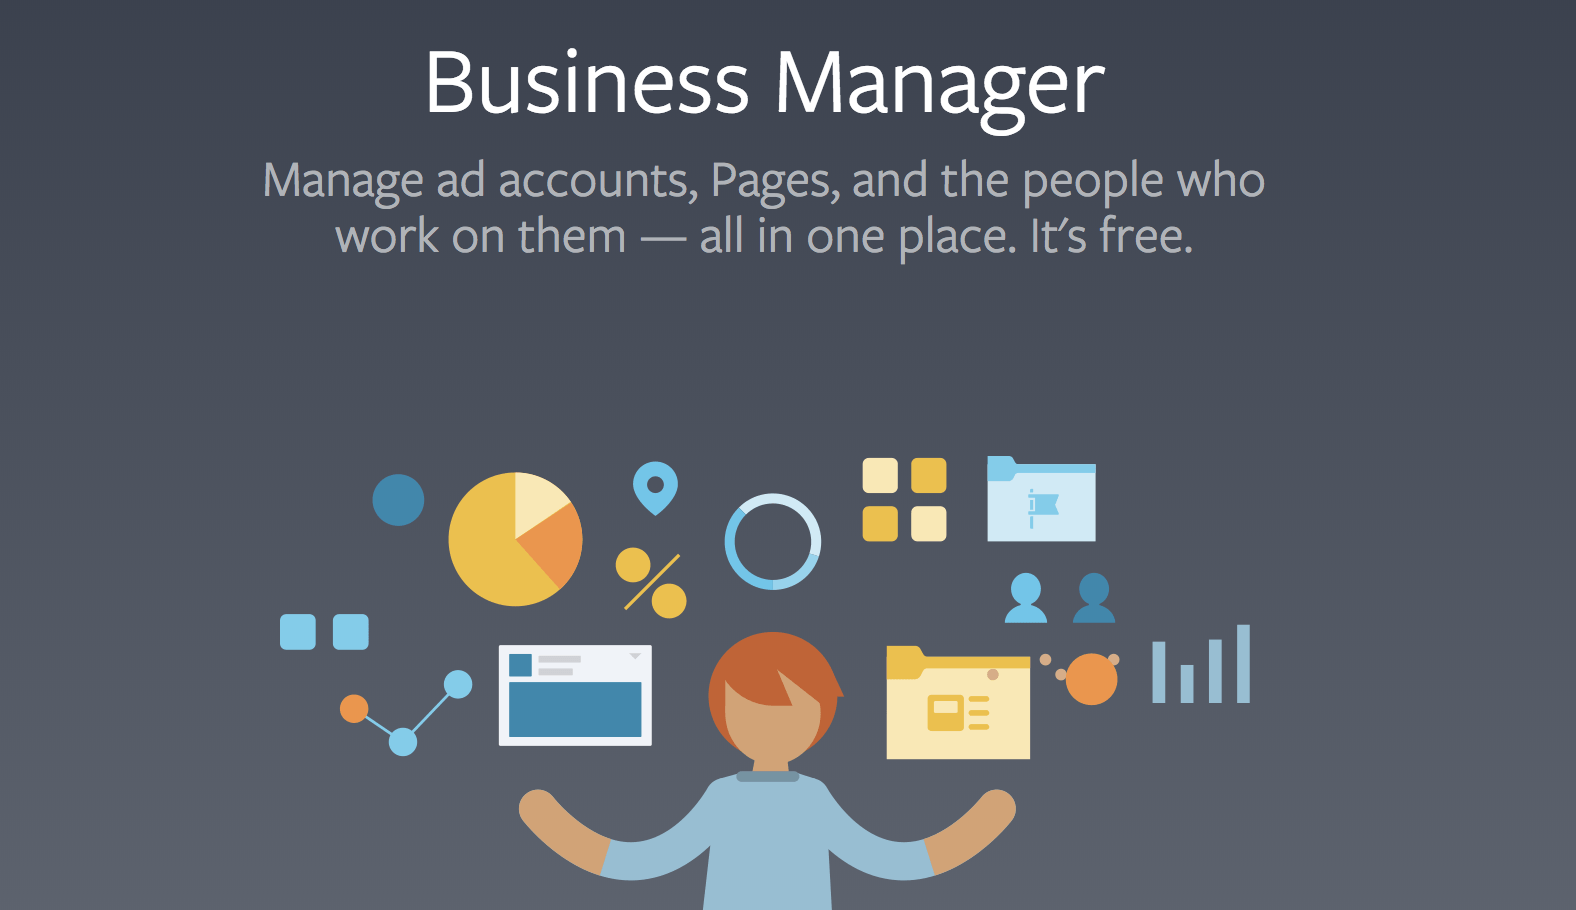 How to set up Facebook Business Manager account | Newsfeed.org